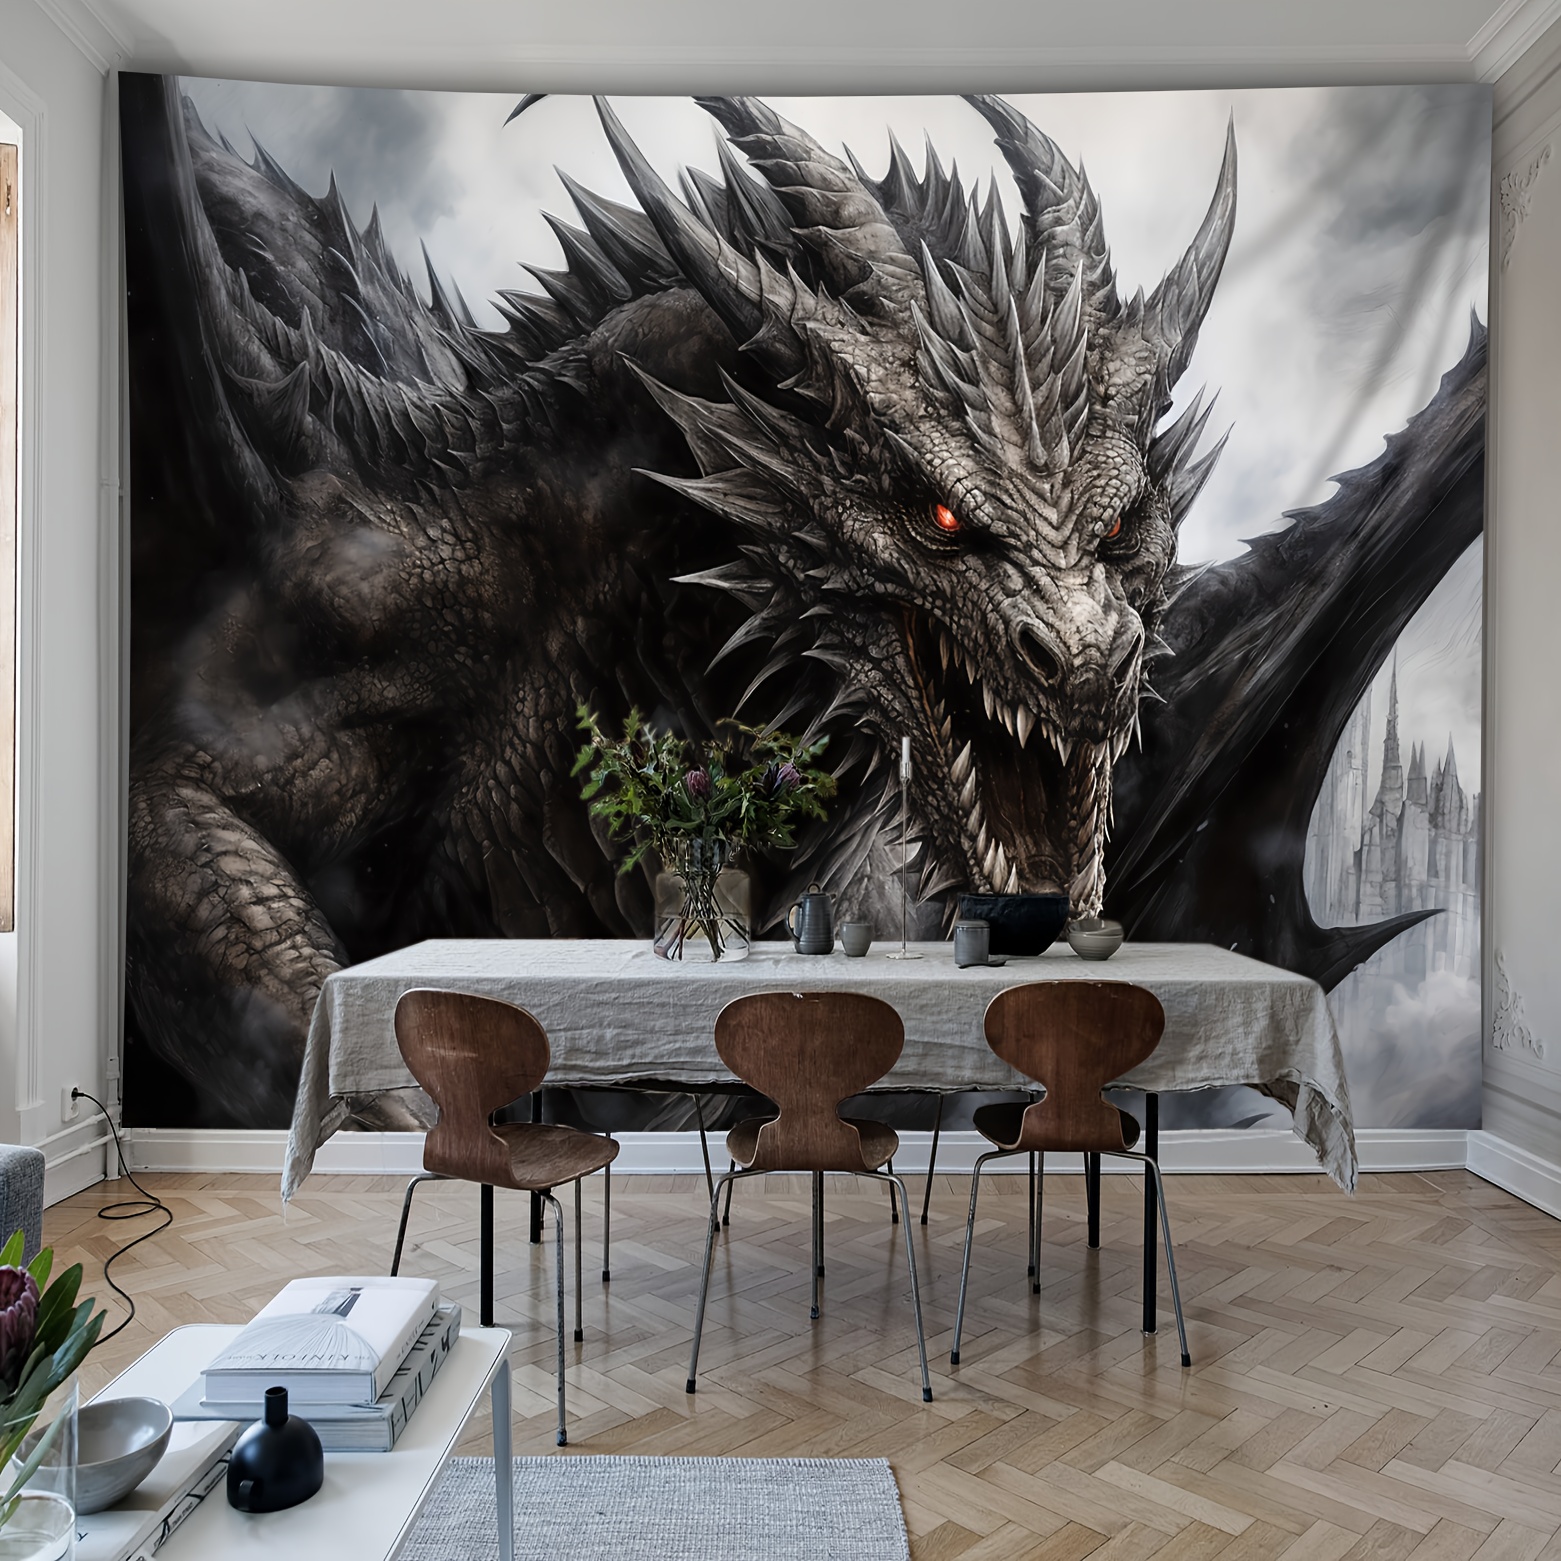 

1pc Dragon Pattern Tapestry, Wall Hanging Large Size Tapestries, Suitable For Living Room Bedroom Dormitory, Home Decor, With Free Accessories